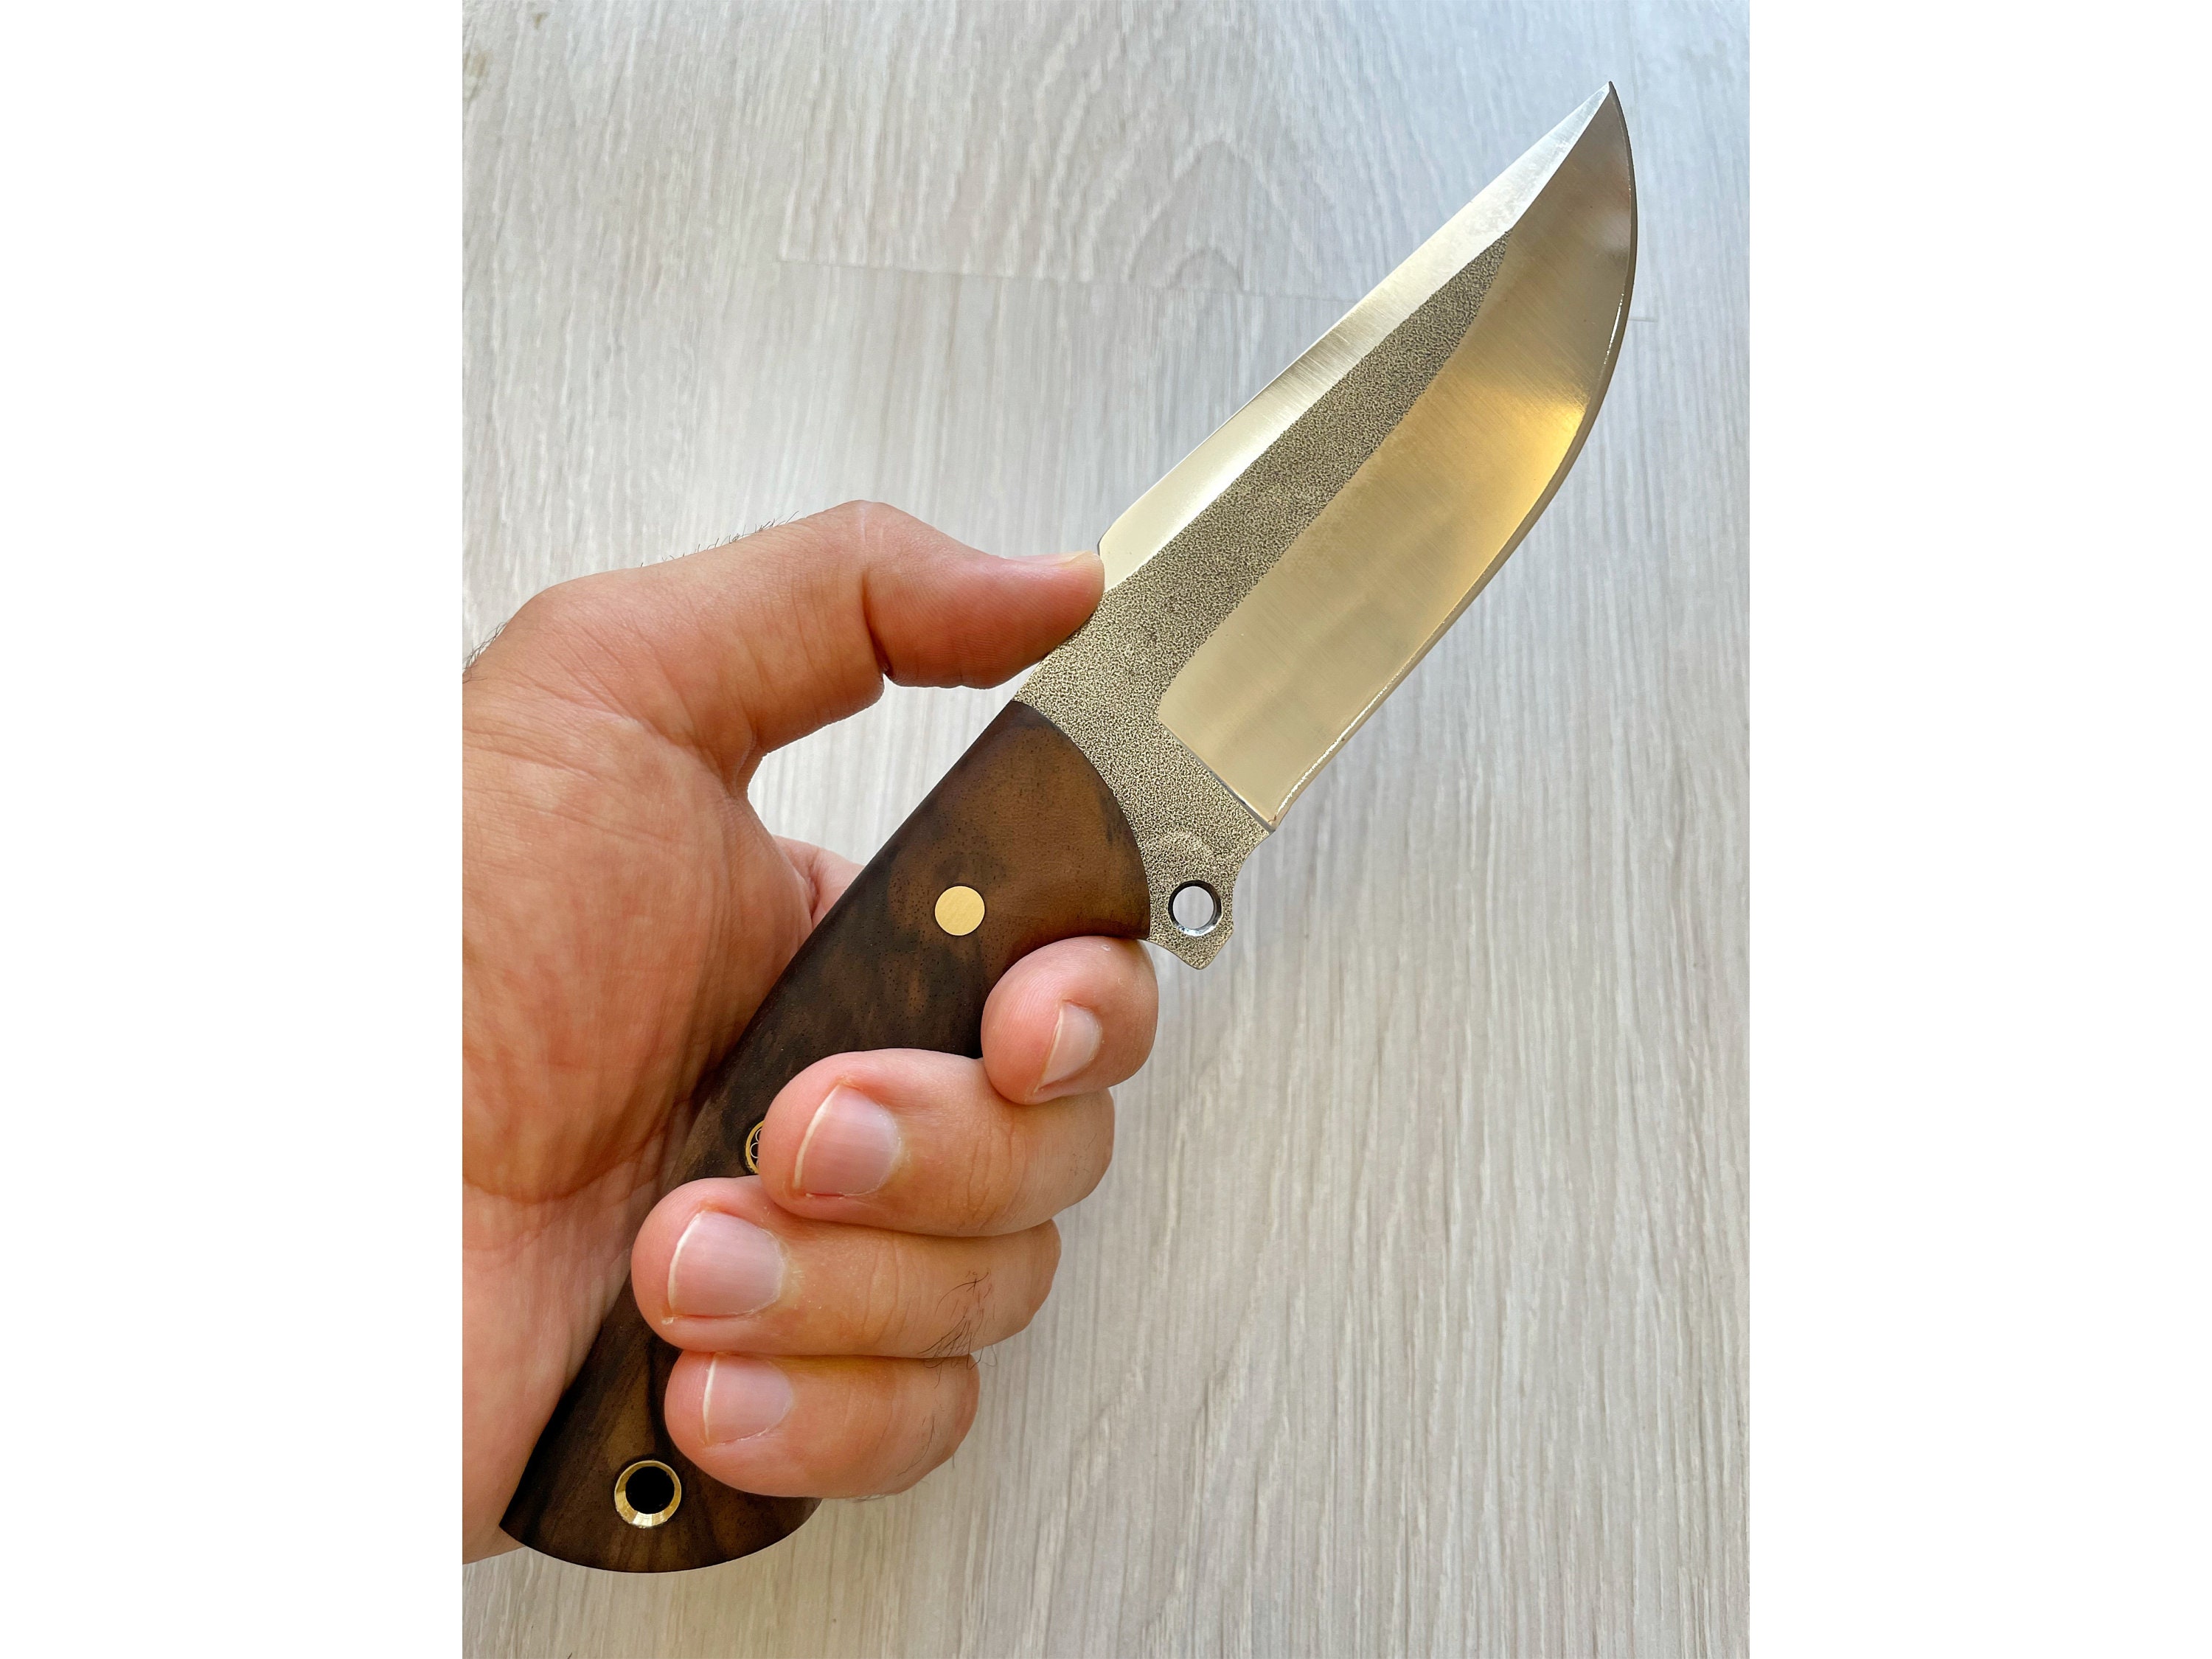 You always need one big knife in the kitchen : r/Bladesmith